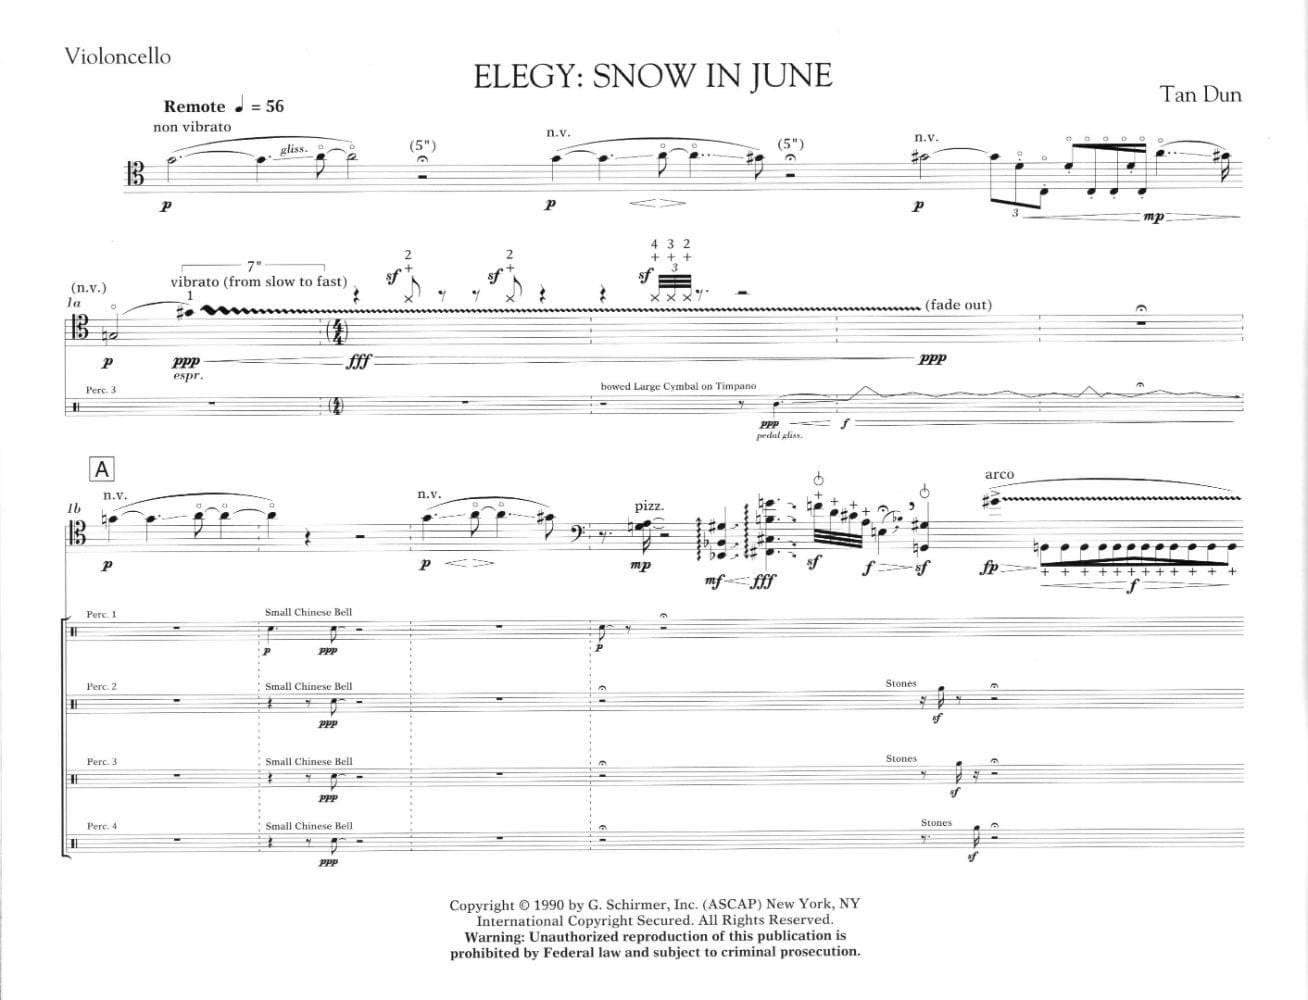 Dun, Tan - Elegy: Snow In June - Concerto for Cello and 4 Percussionists - Score and Parts - G Schirmer Edition